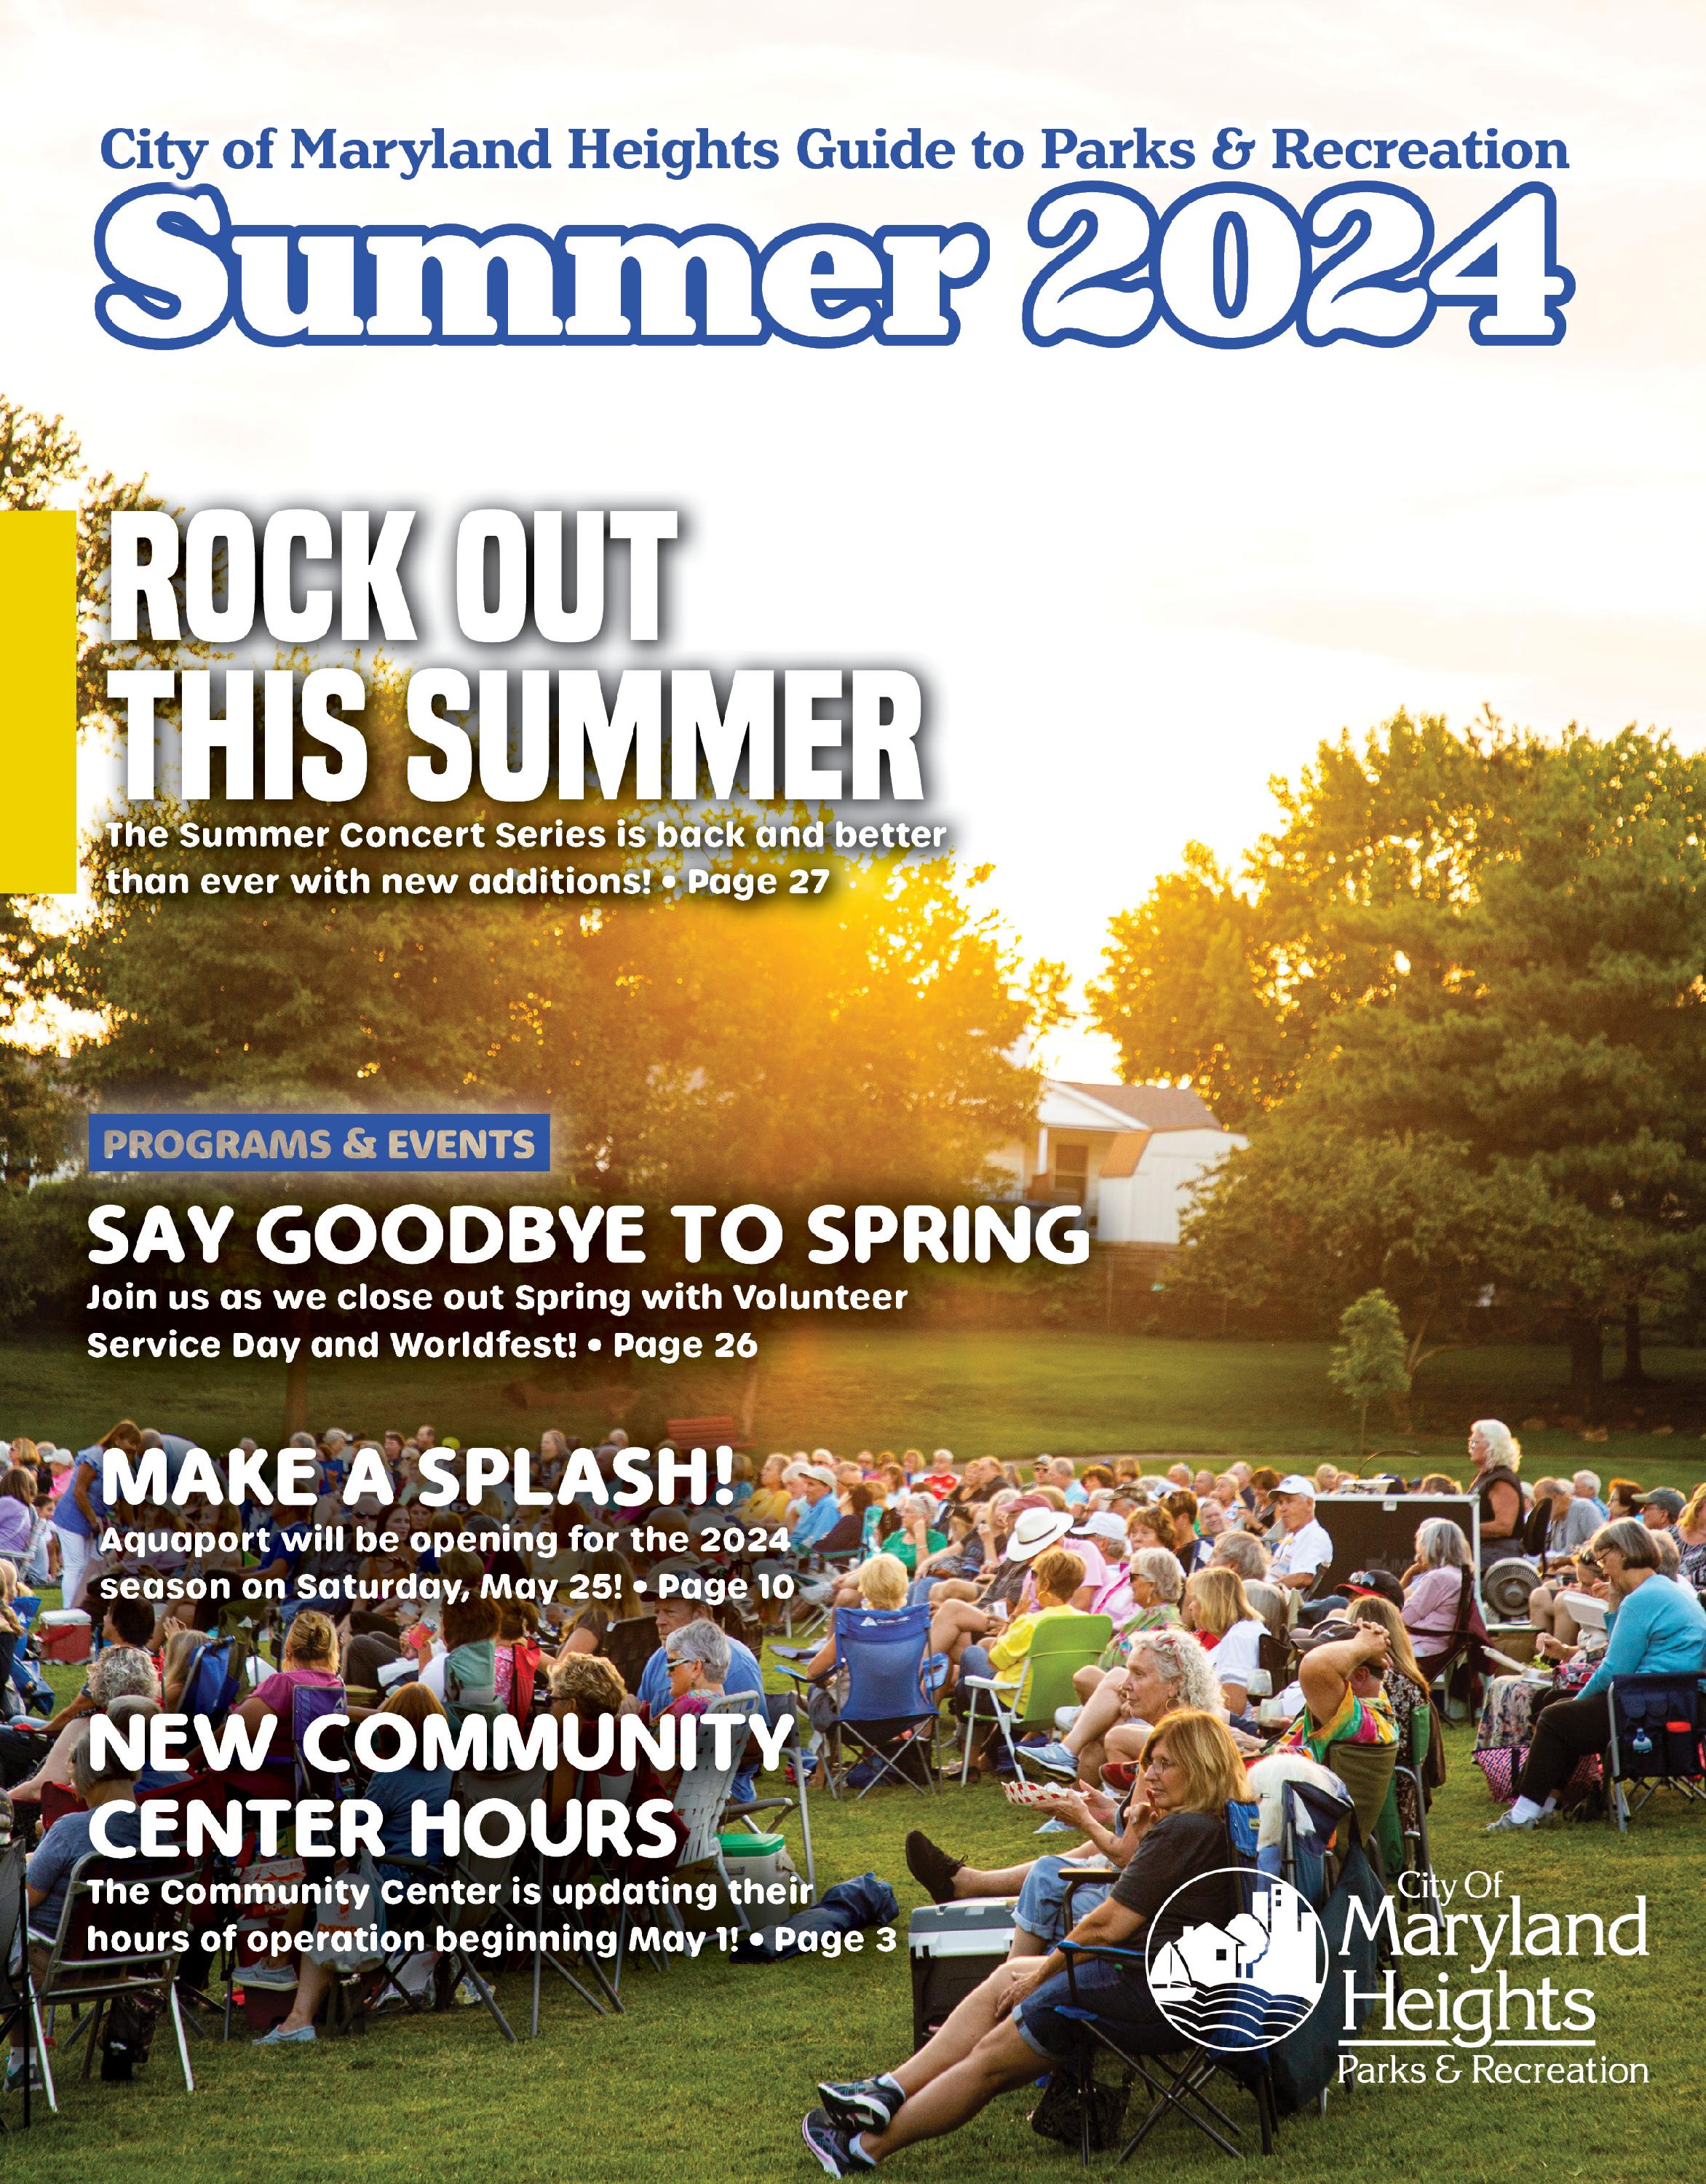 Summer 2024 Guide Cover